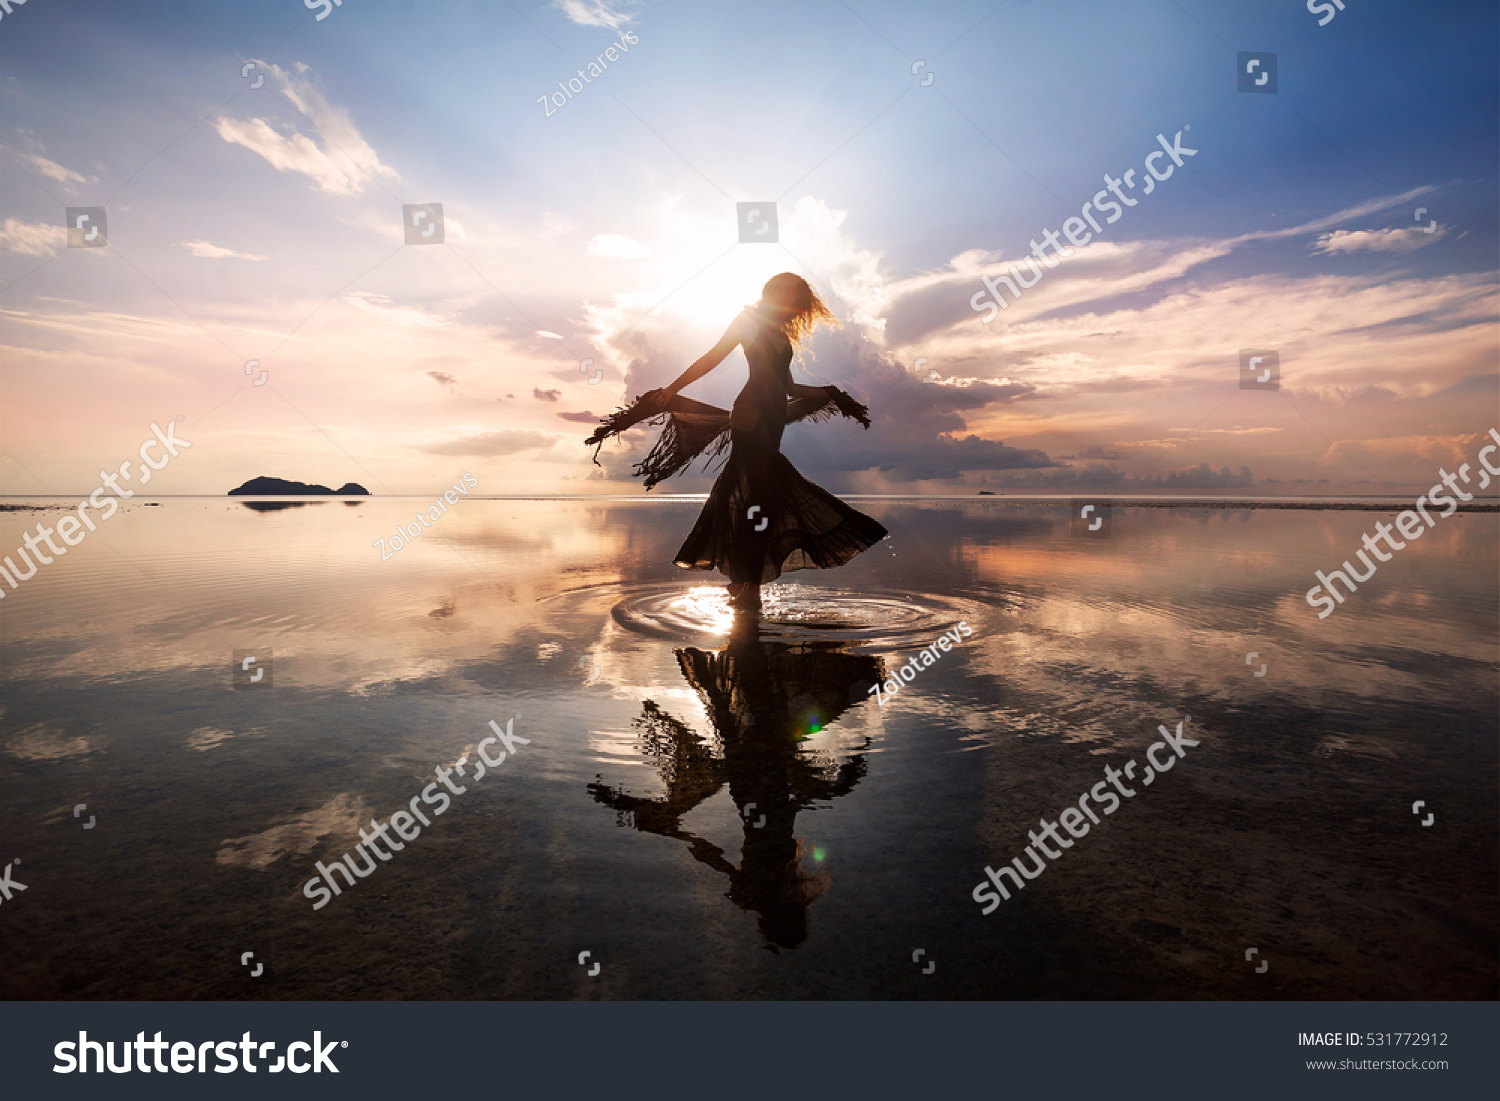 Elegant woman dancing on water. Sunset and silhouette. #531772912